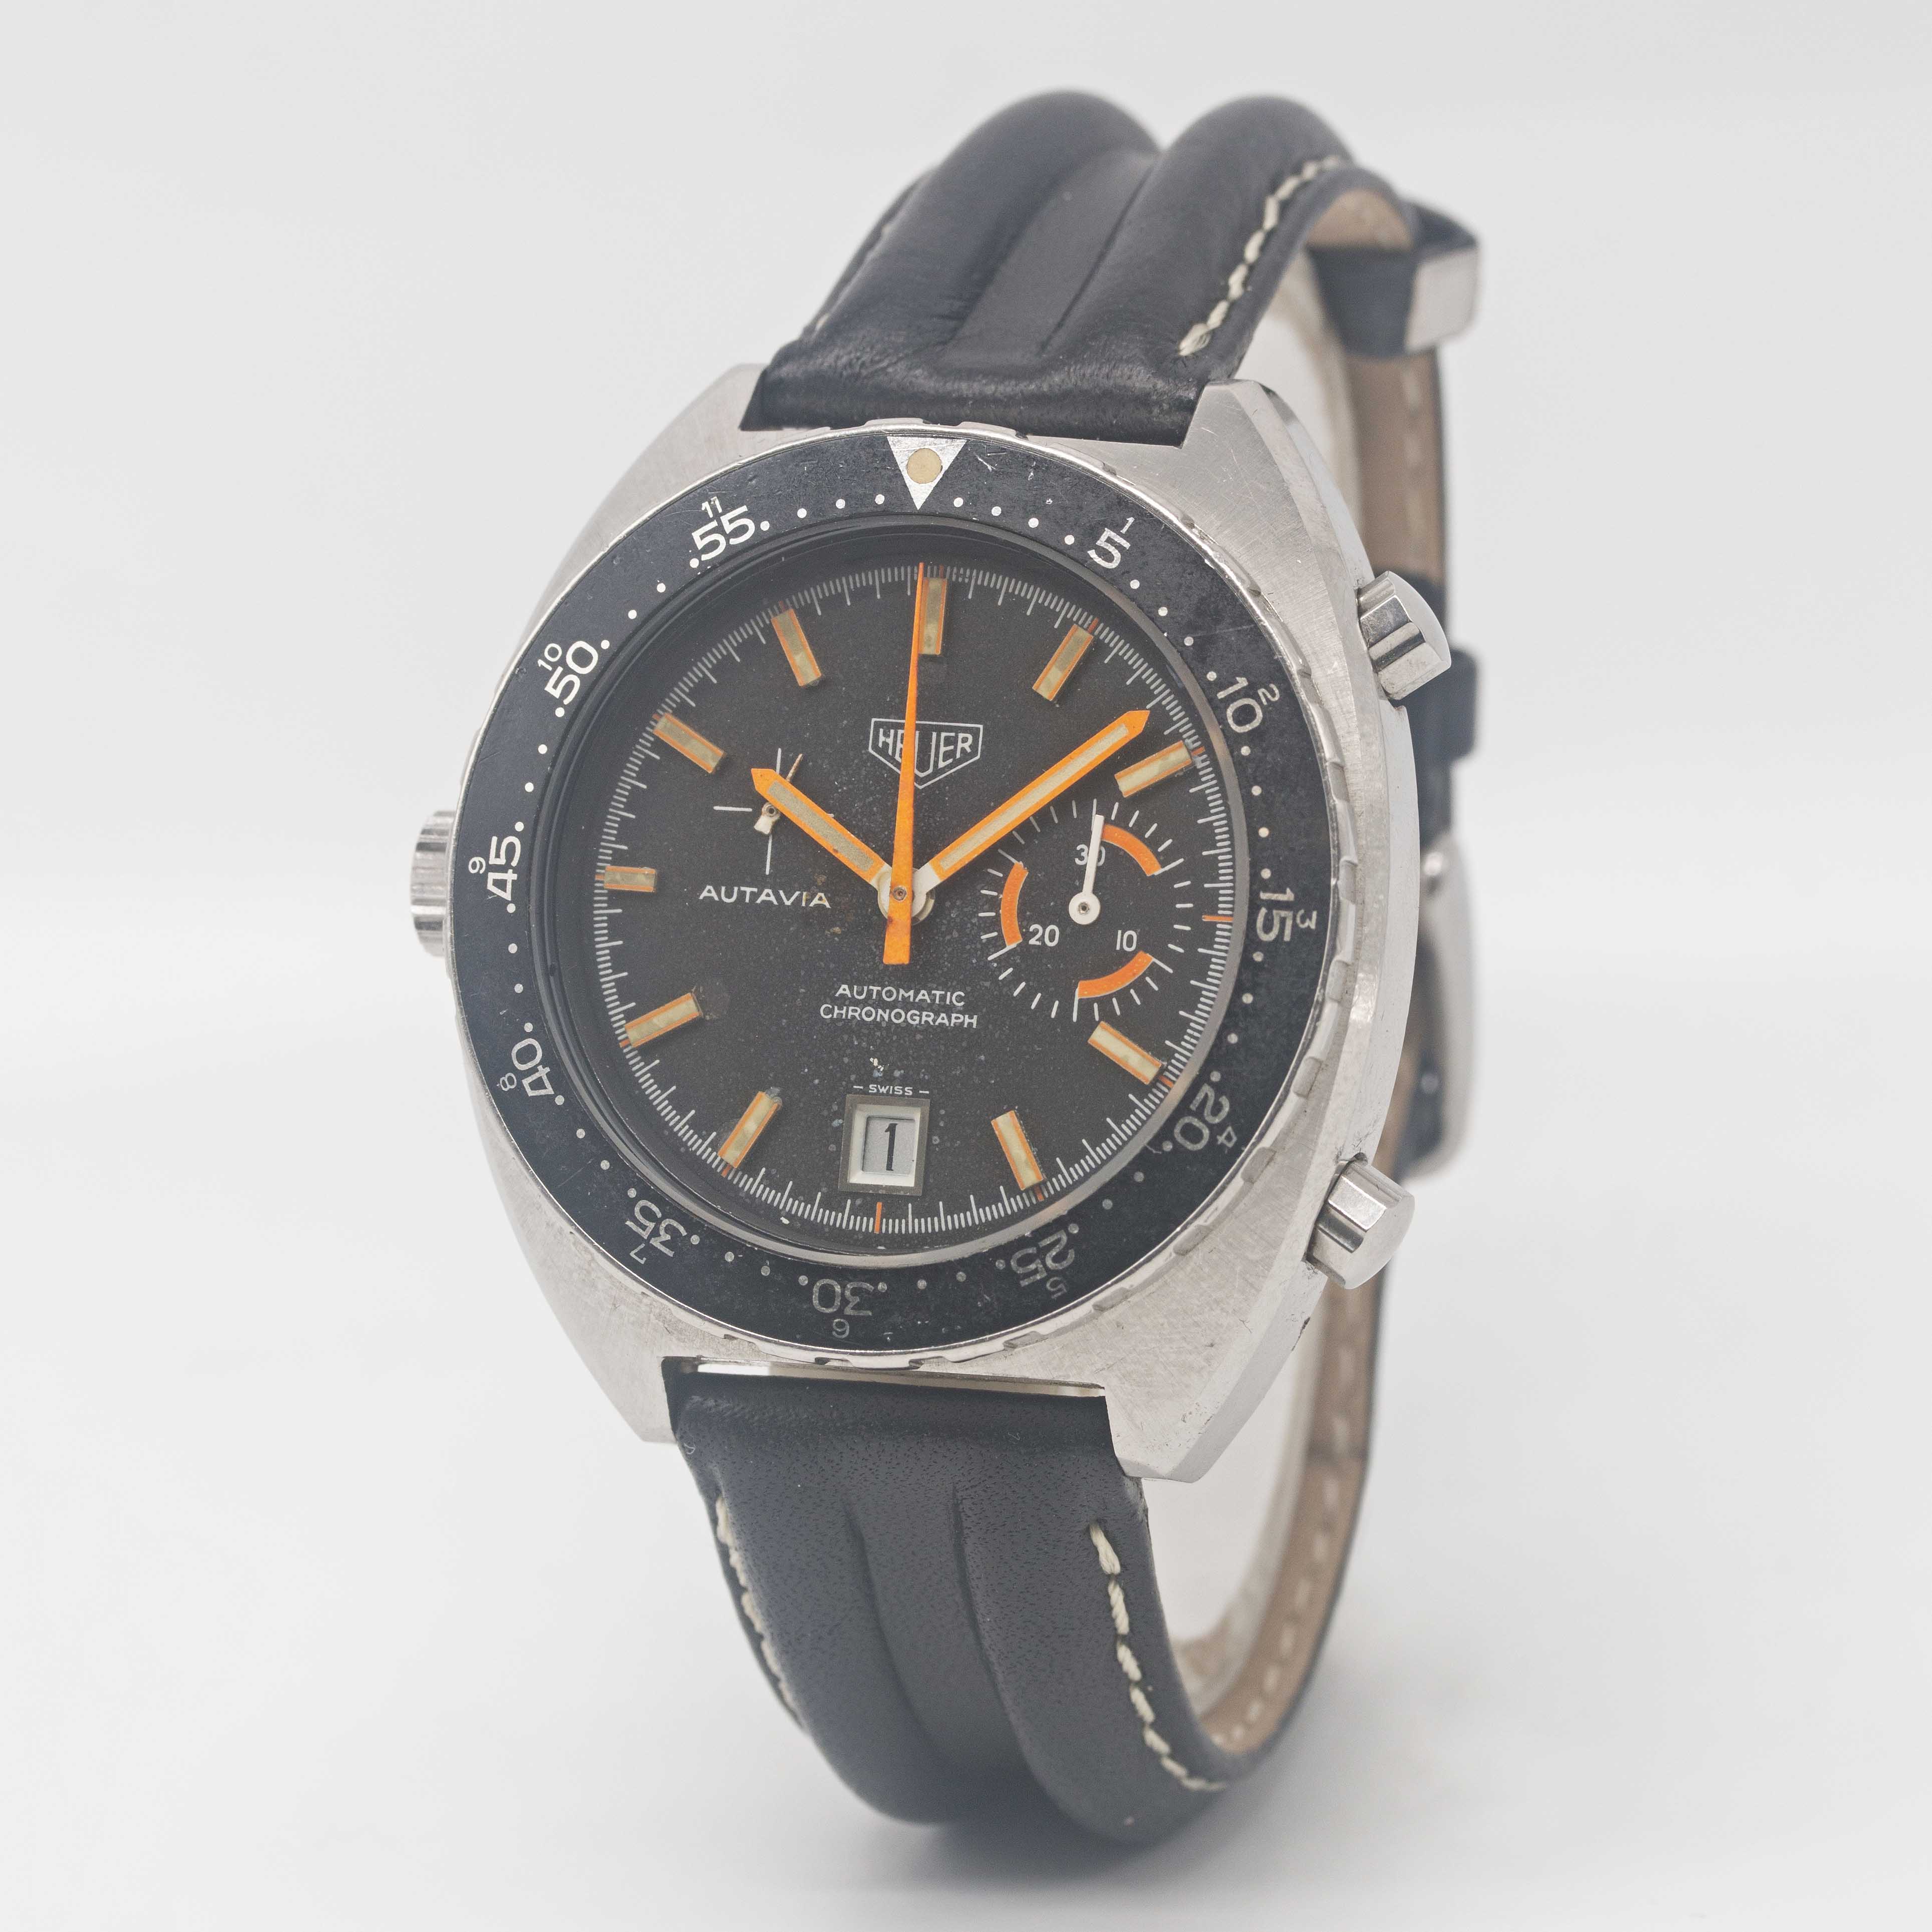 A GENTLEMAN'S STAINLESS STEEL HEUER AUTAVIA AUTOMATIC CHRONOGRAPH WRIST WATCH CIRCA 1970s, REF. - Image 3 of 5